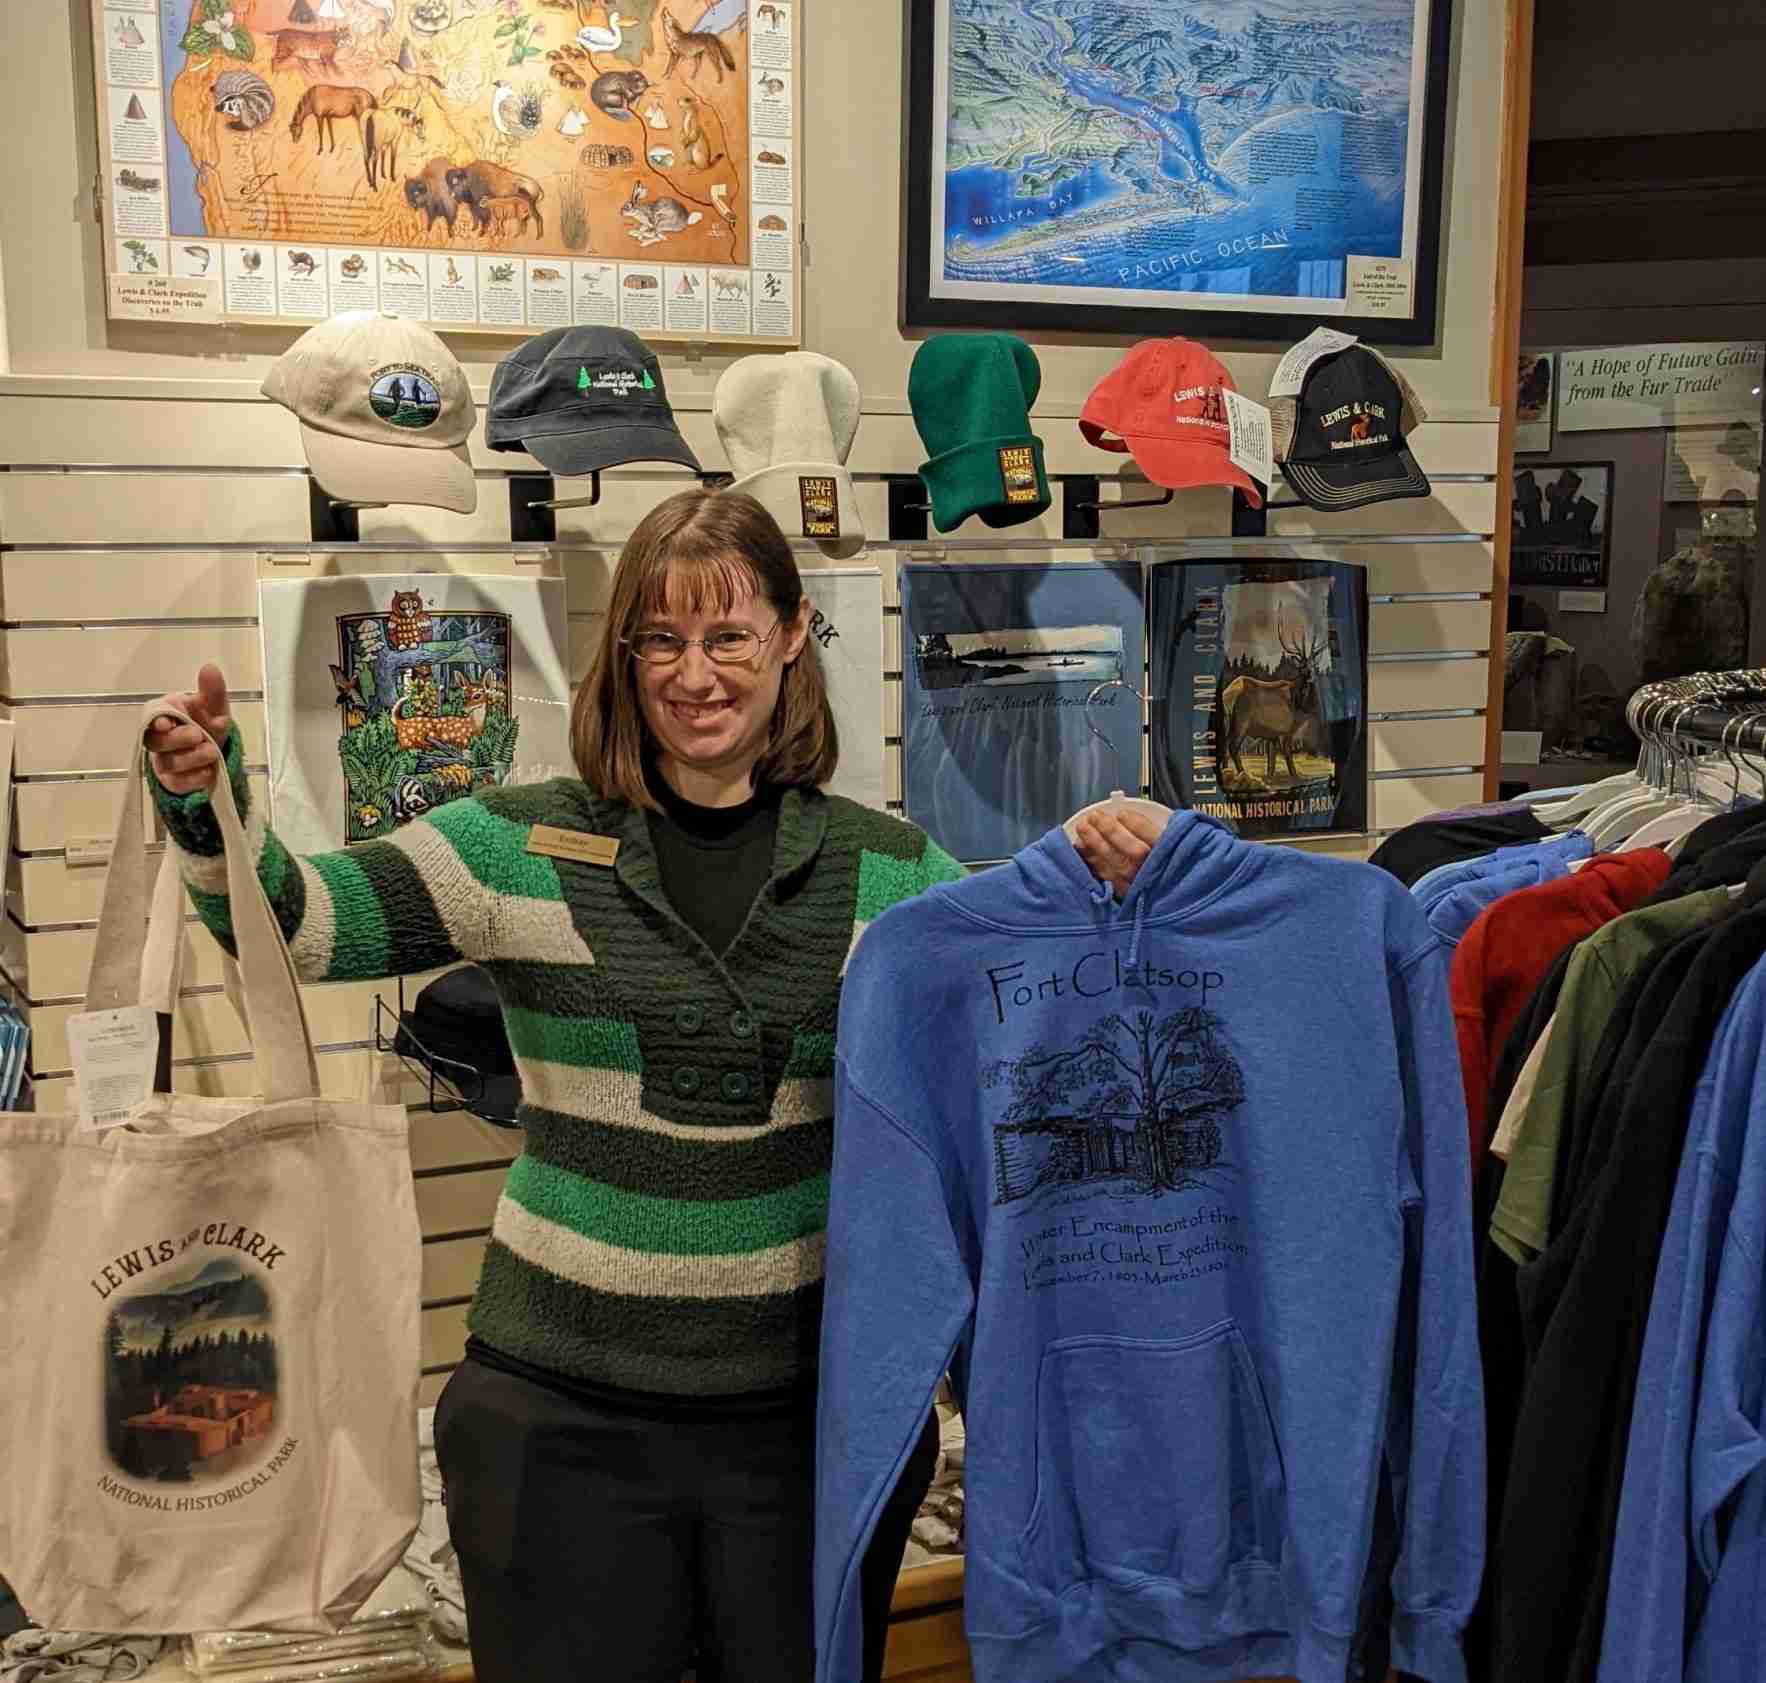 How People Show Their Love for Parks – Apparel at Public Lands Partner Stores